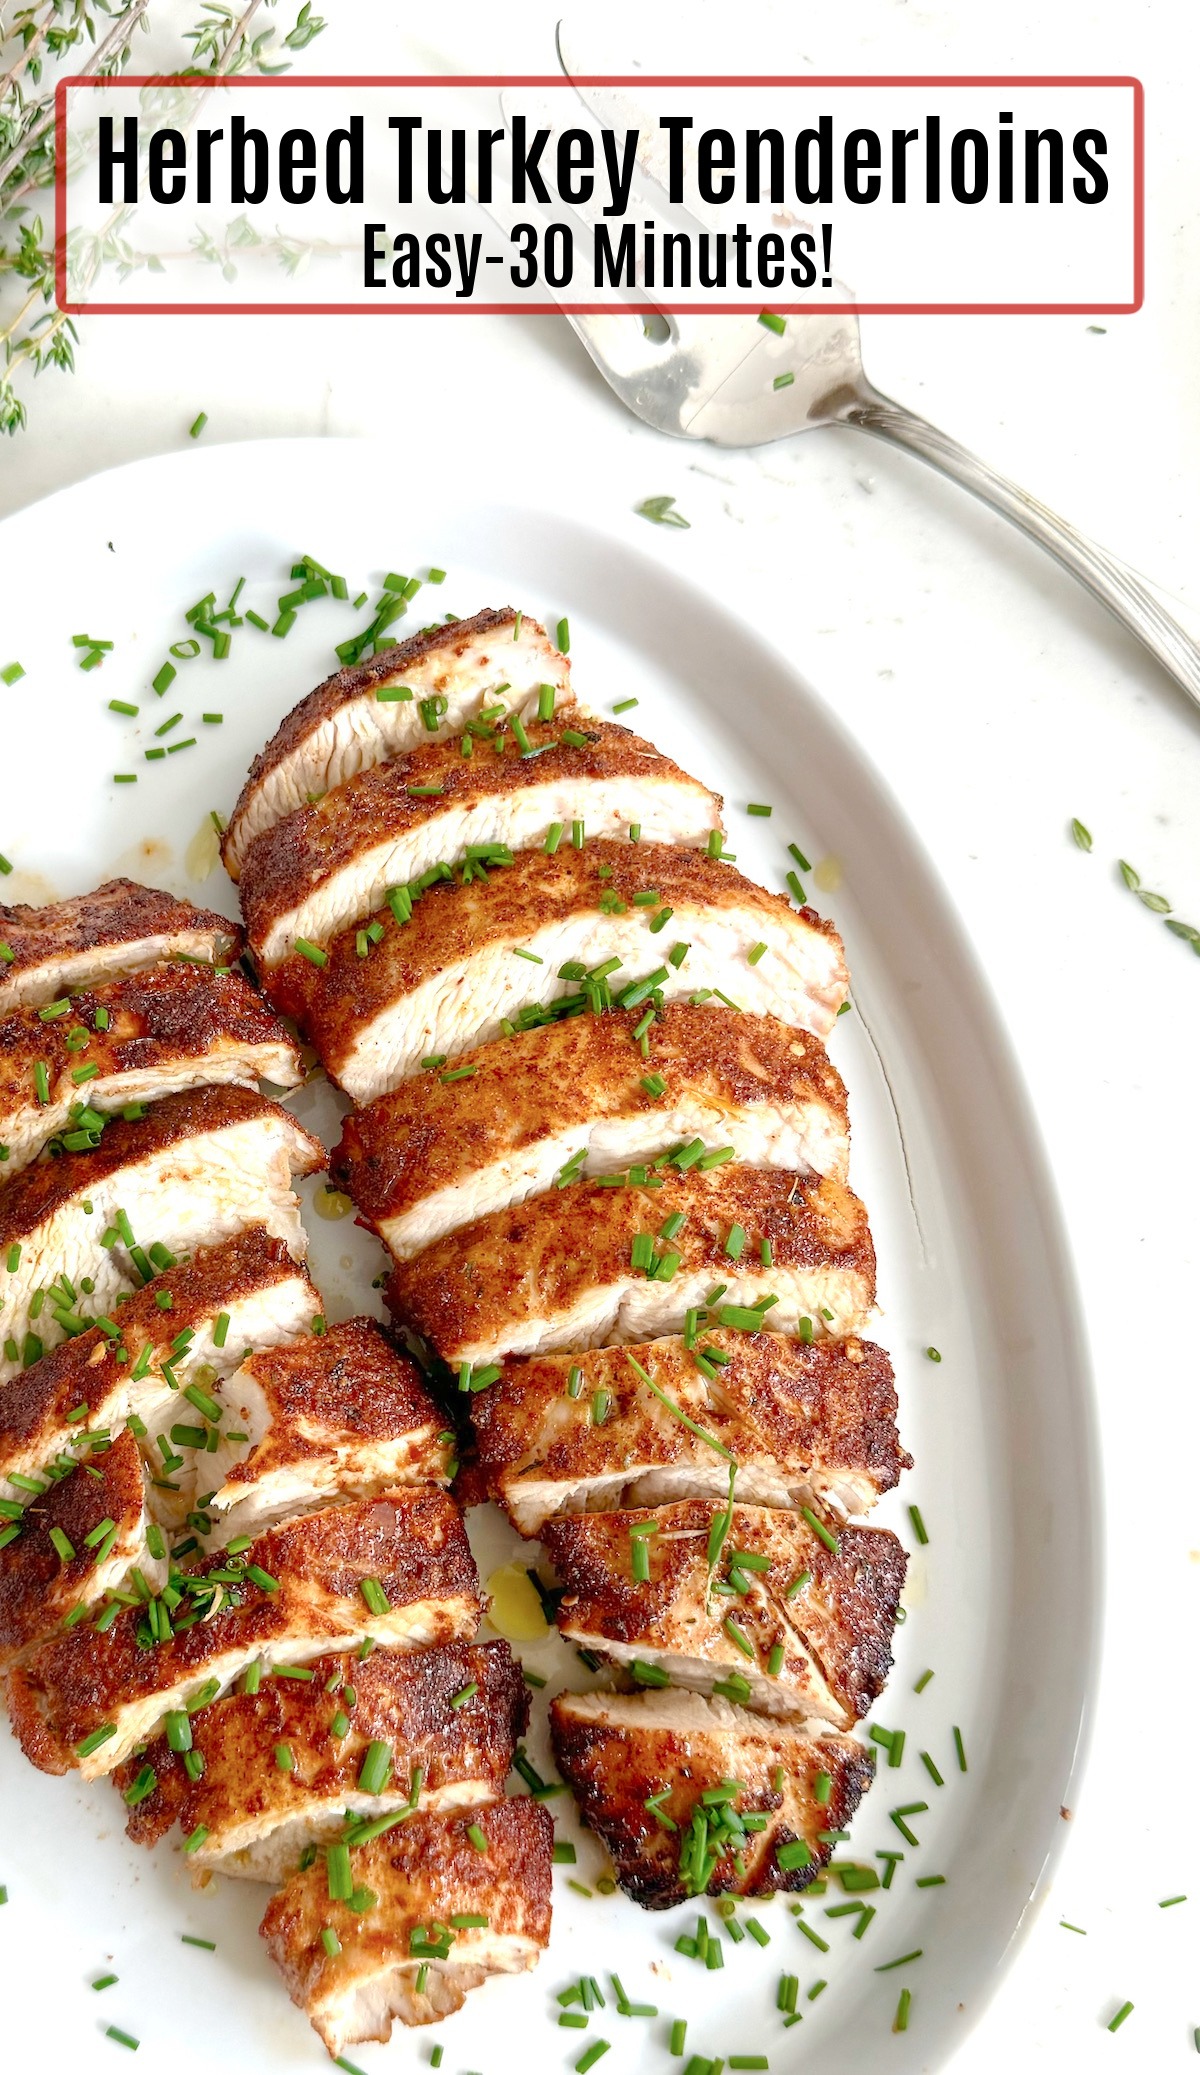 Two Easy Herbed Turkey Tenderloins garnished with chives on a white plate